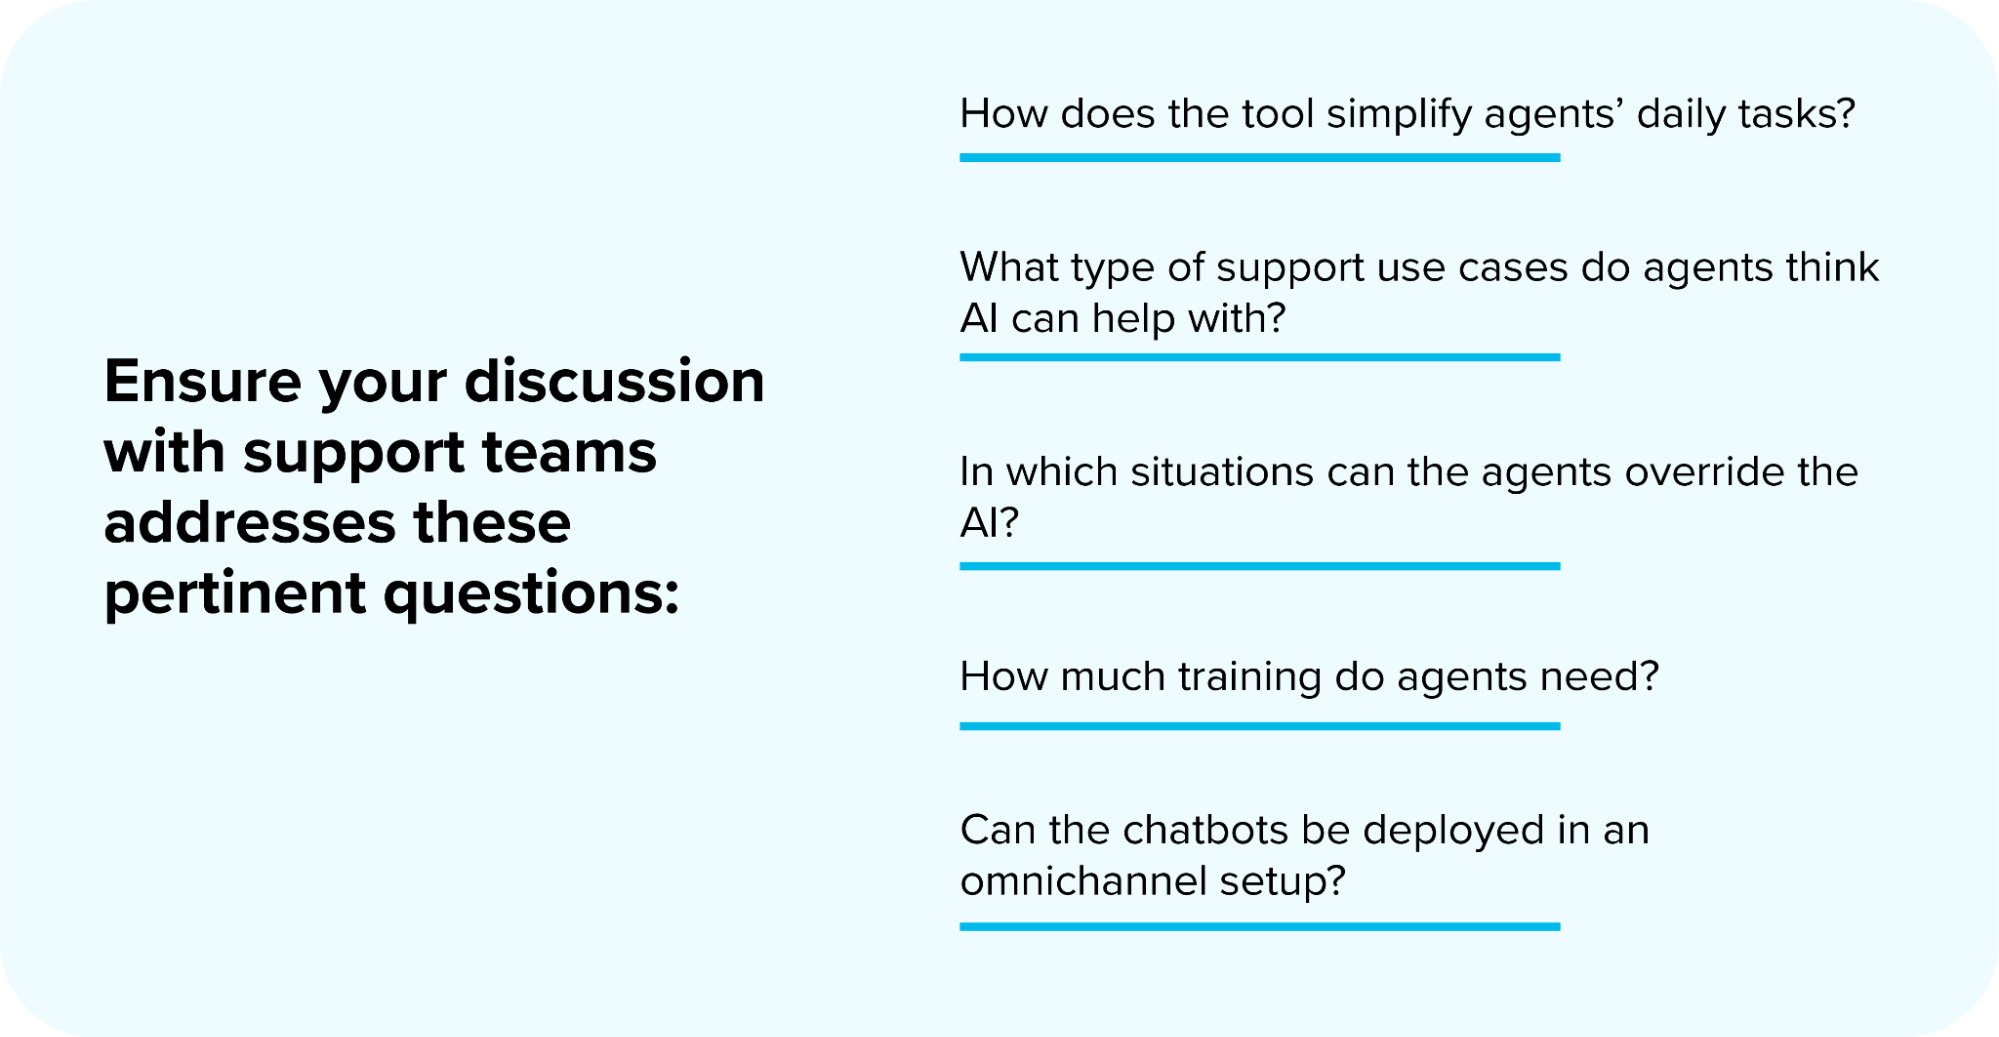 Involve your agents at every step of chatbot deployment